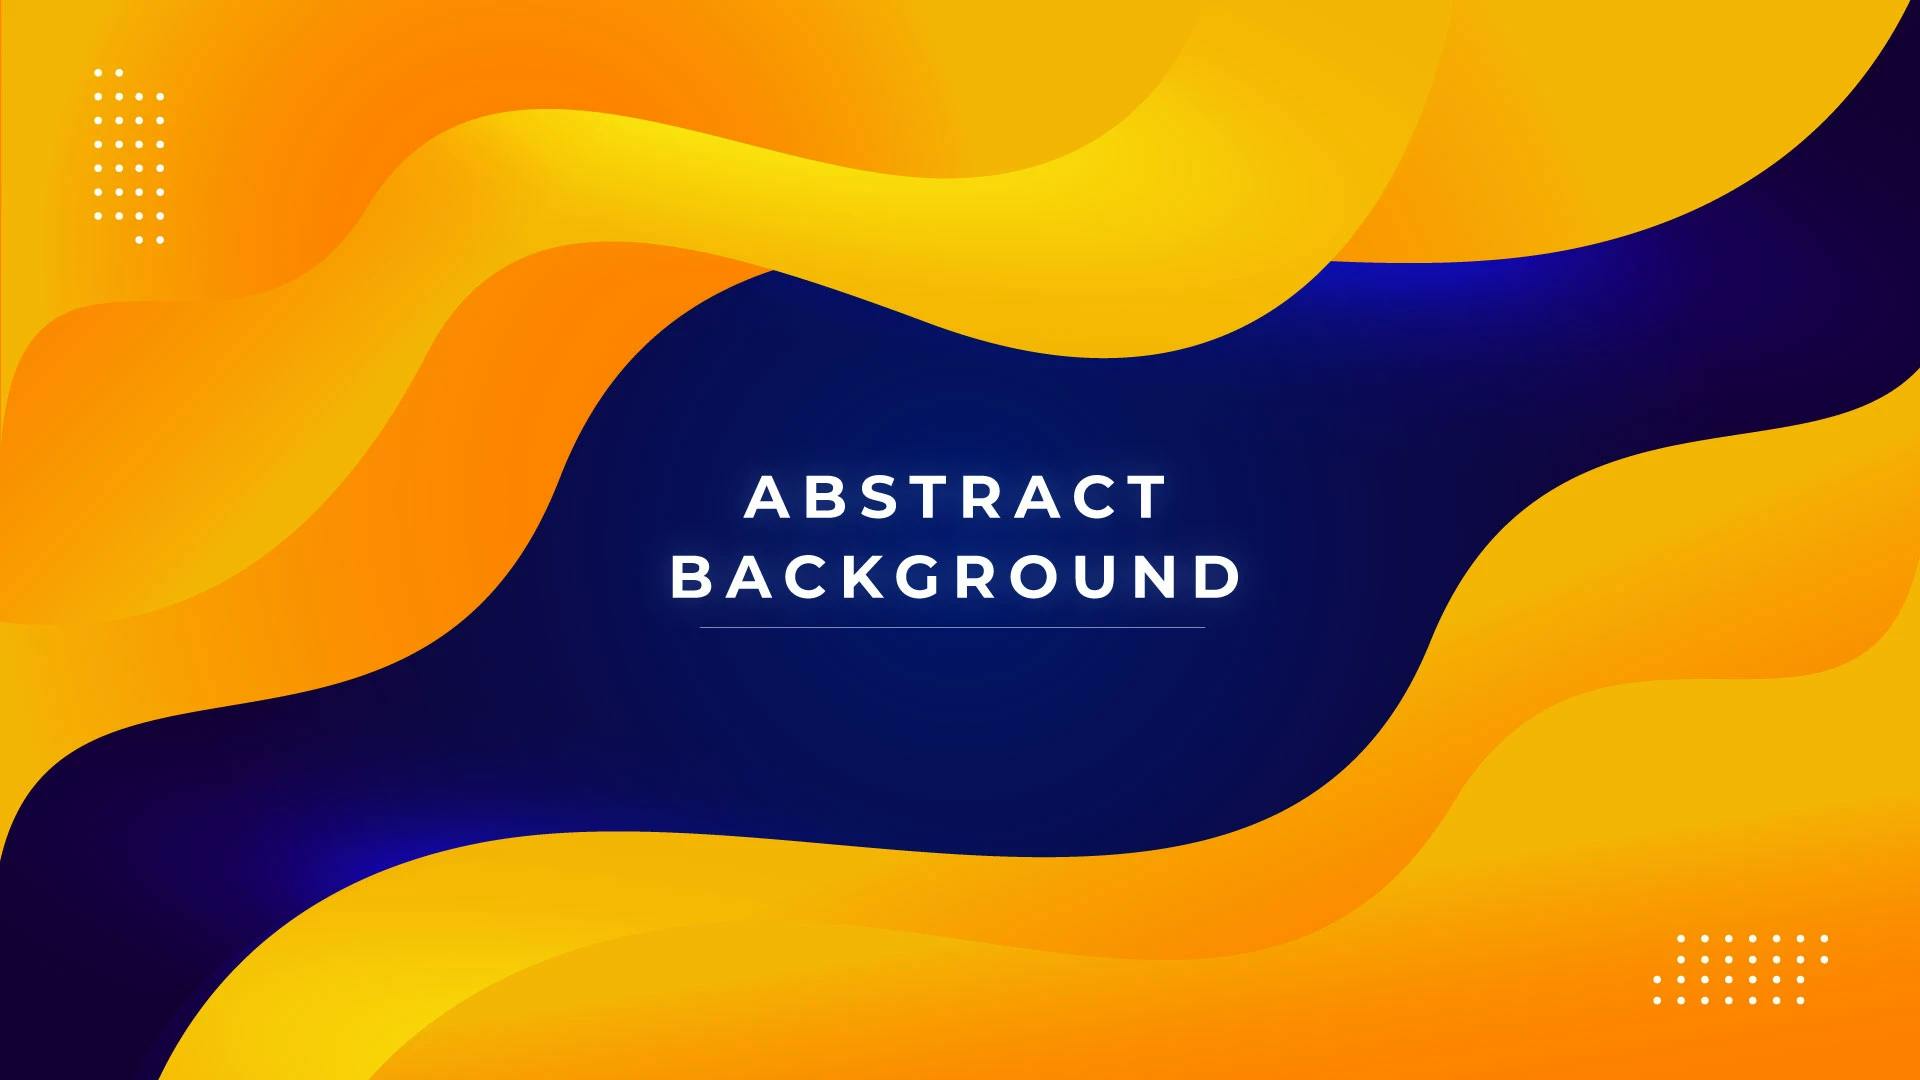 Royal Blue with Glowing Yellow Abstract Background Template